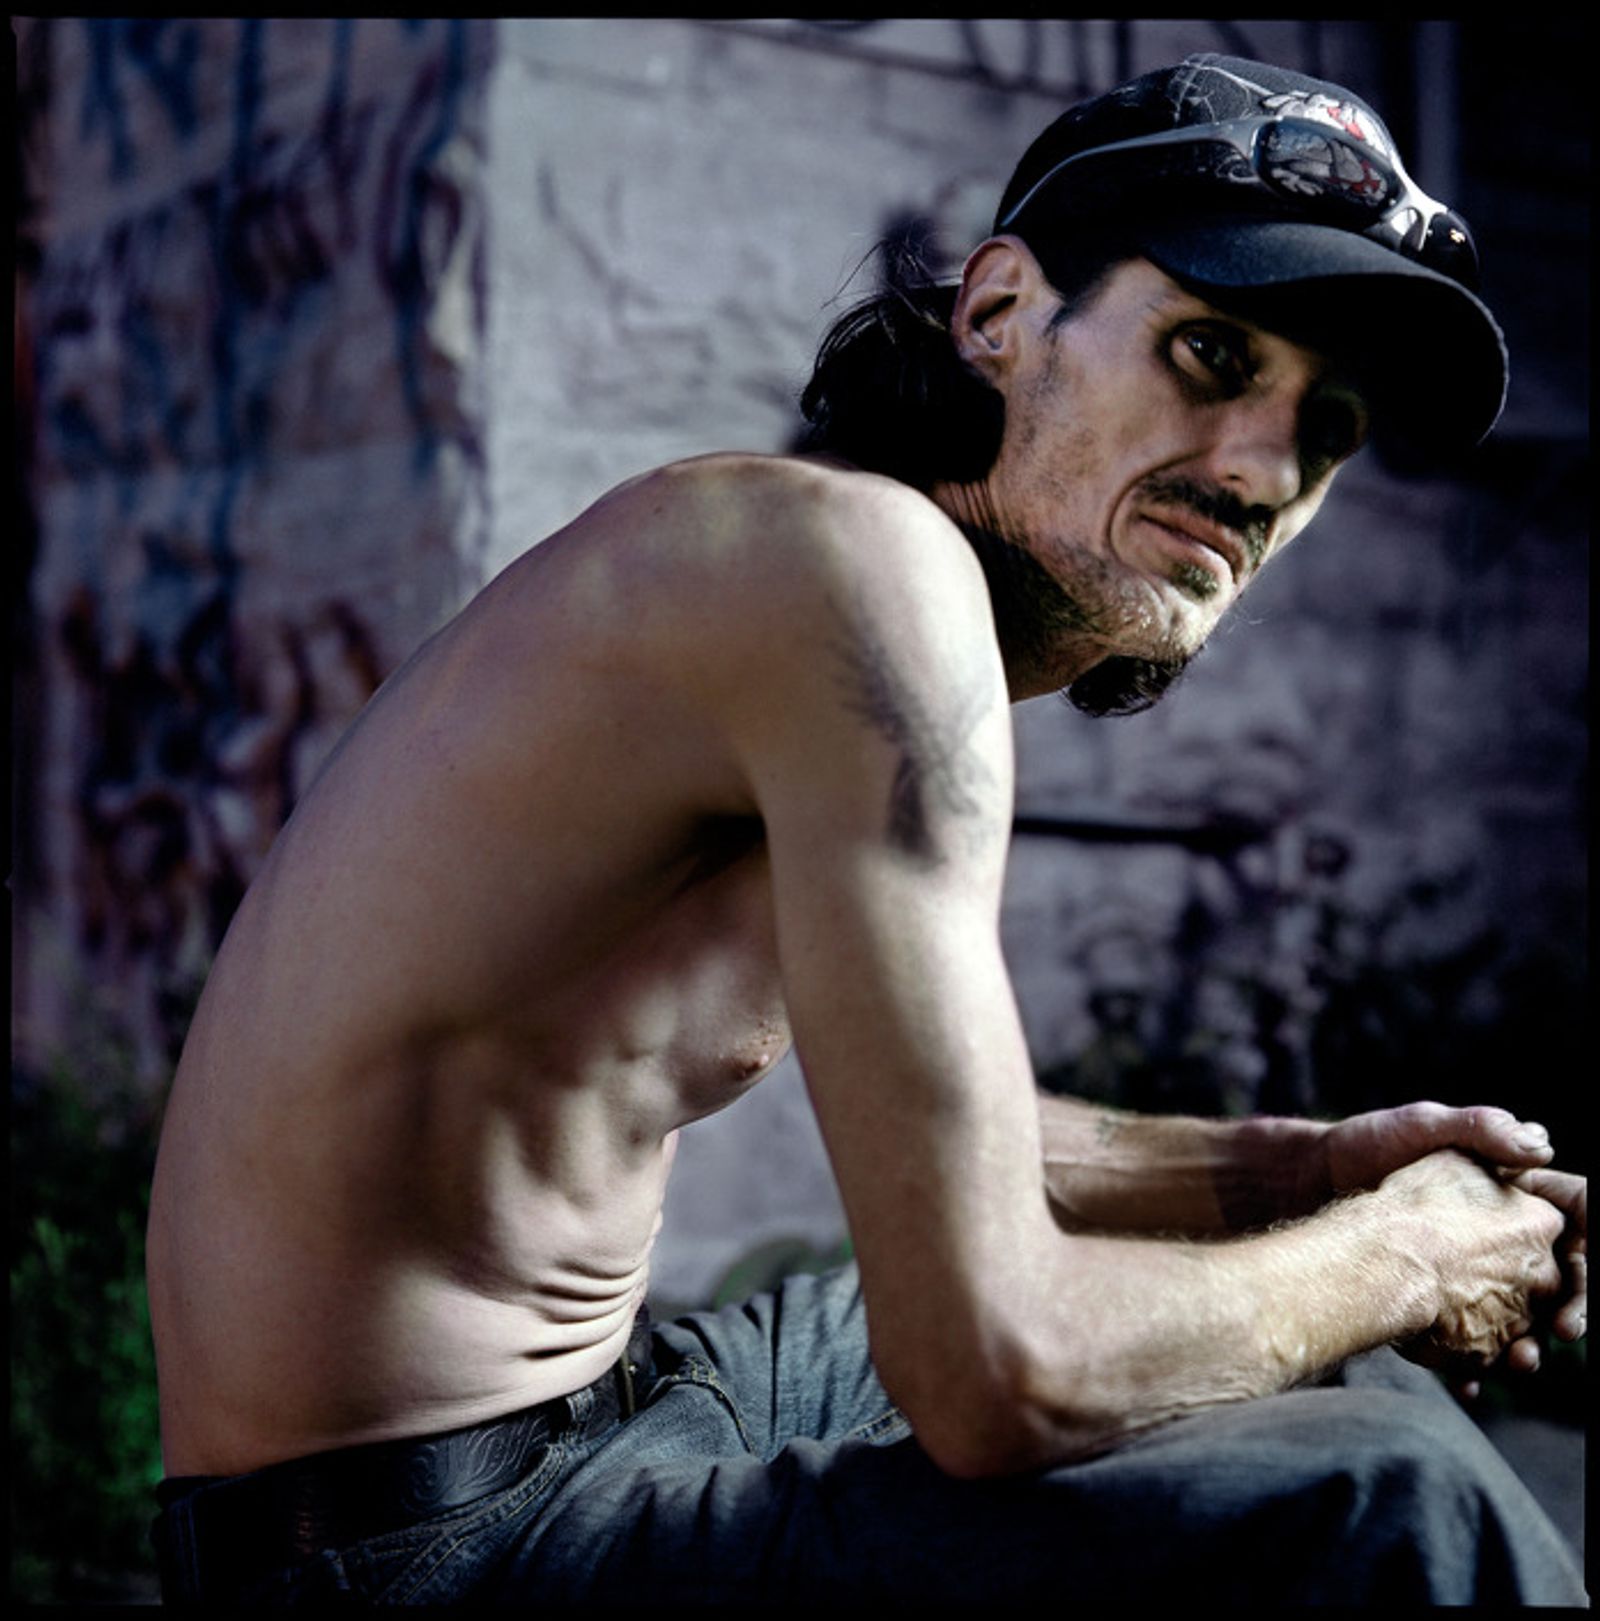 © Tony Fouhse - From the series: USER, Portraits of Crack Addicts.